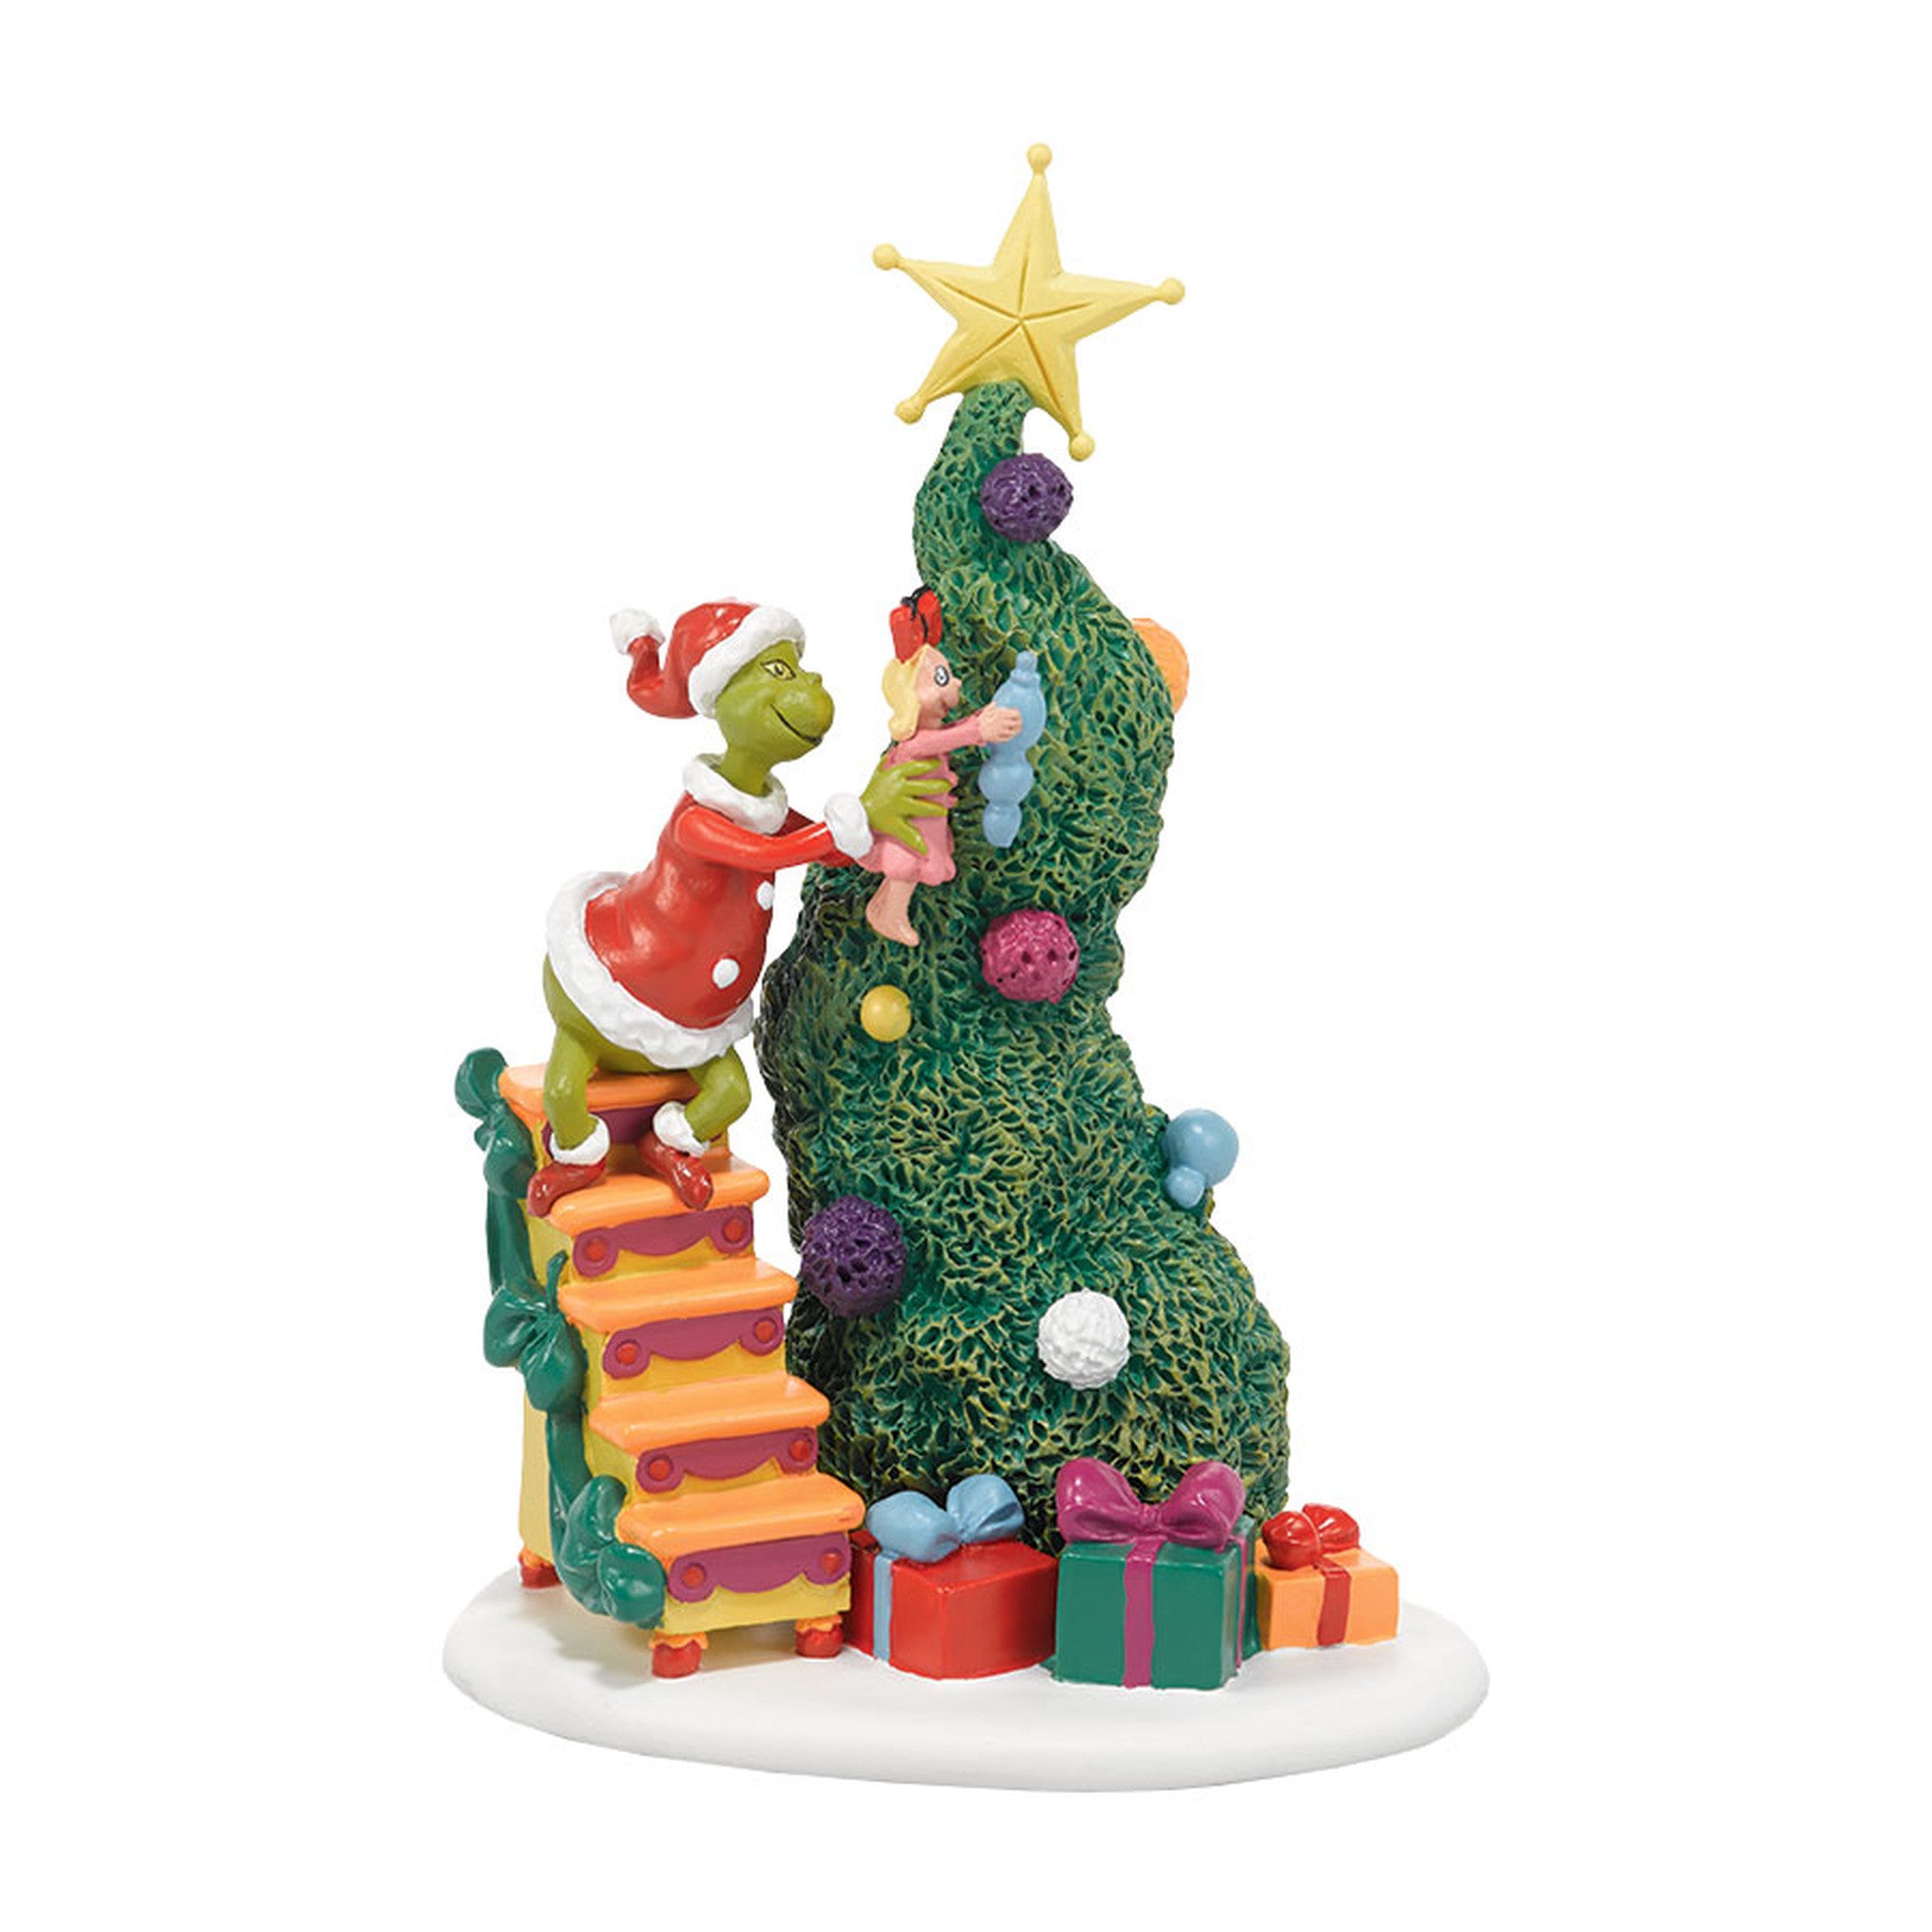 Grinch Village: It Takes Two, Grinch And Cindy-Lou Who